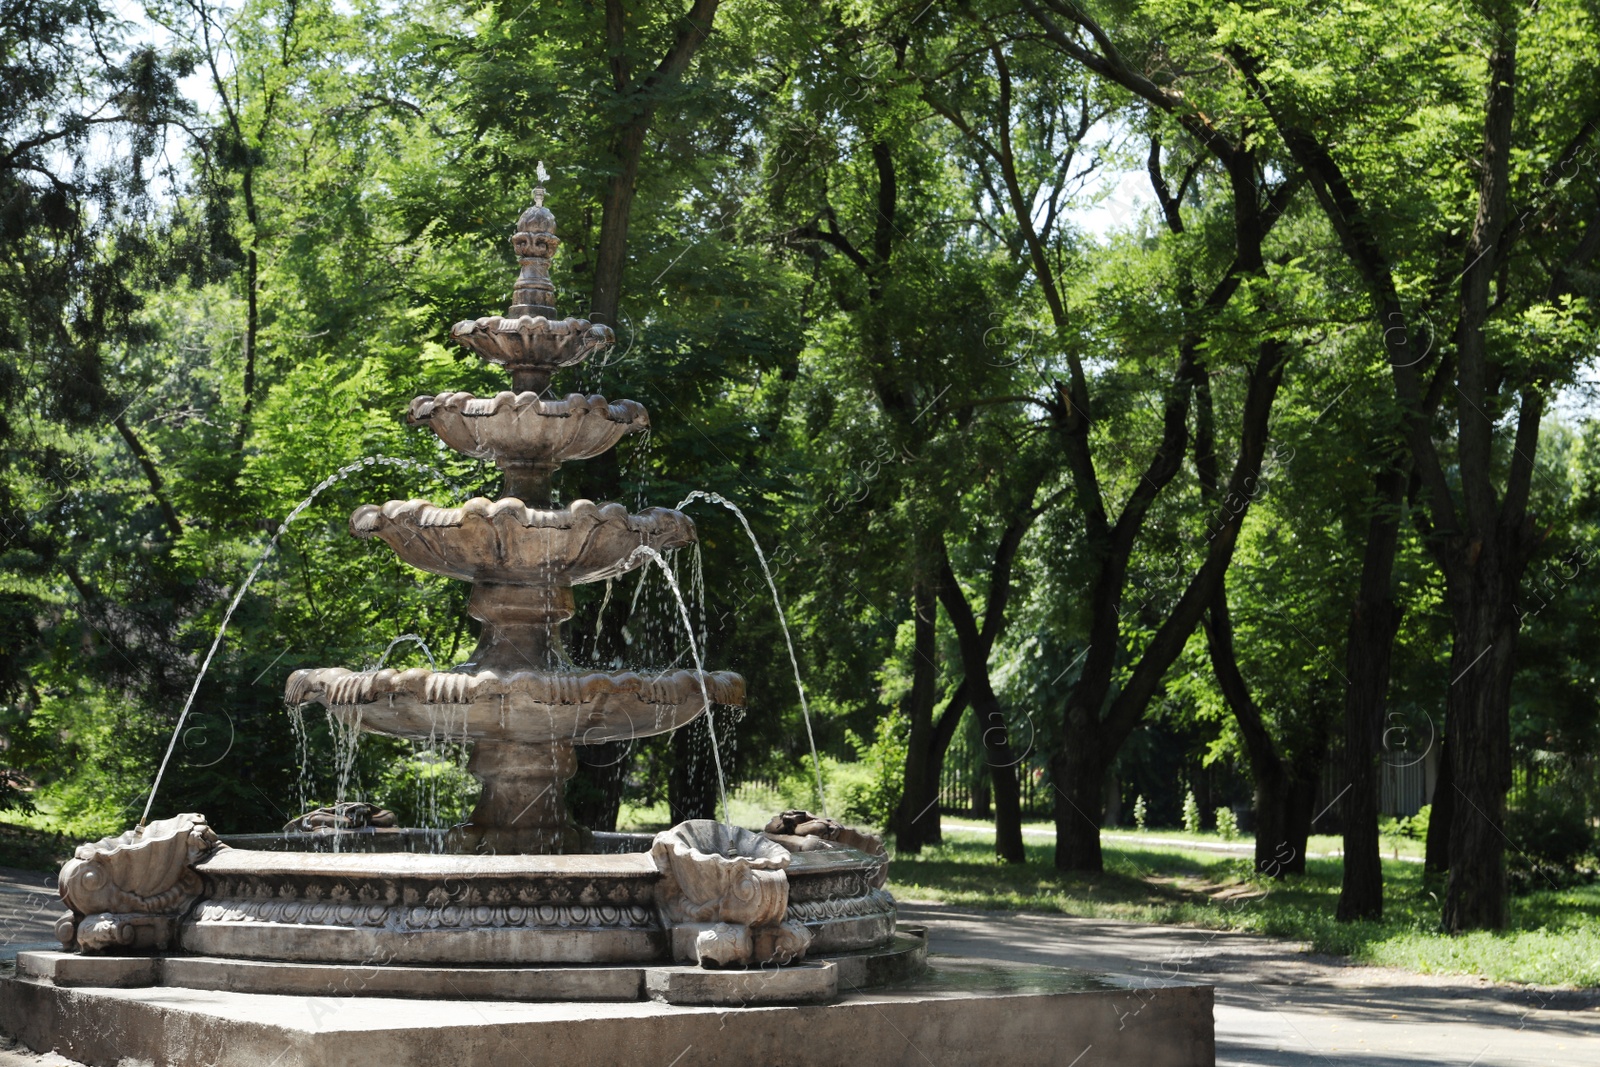 Photo of Beautiful view of fountain in park on sunny day